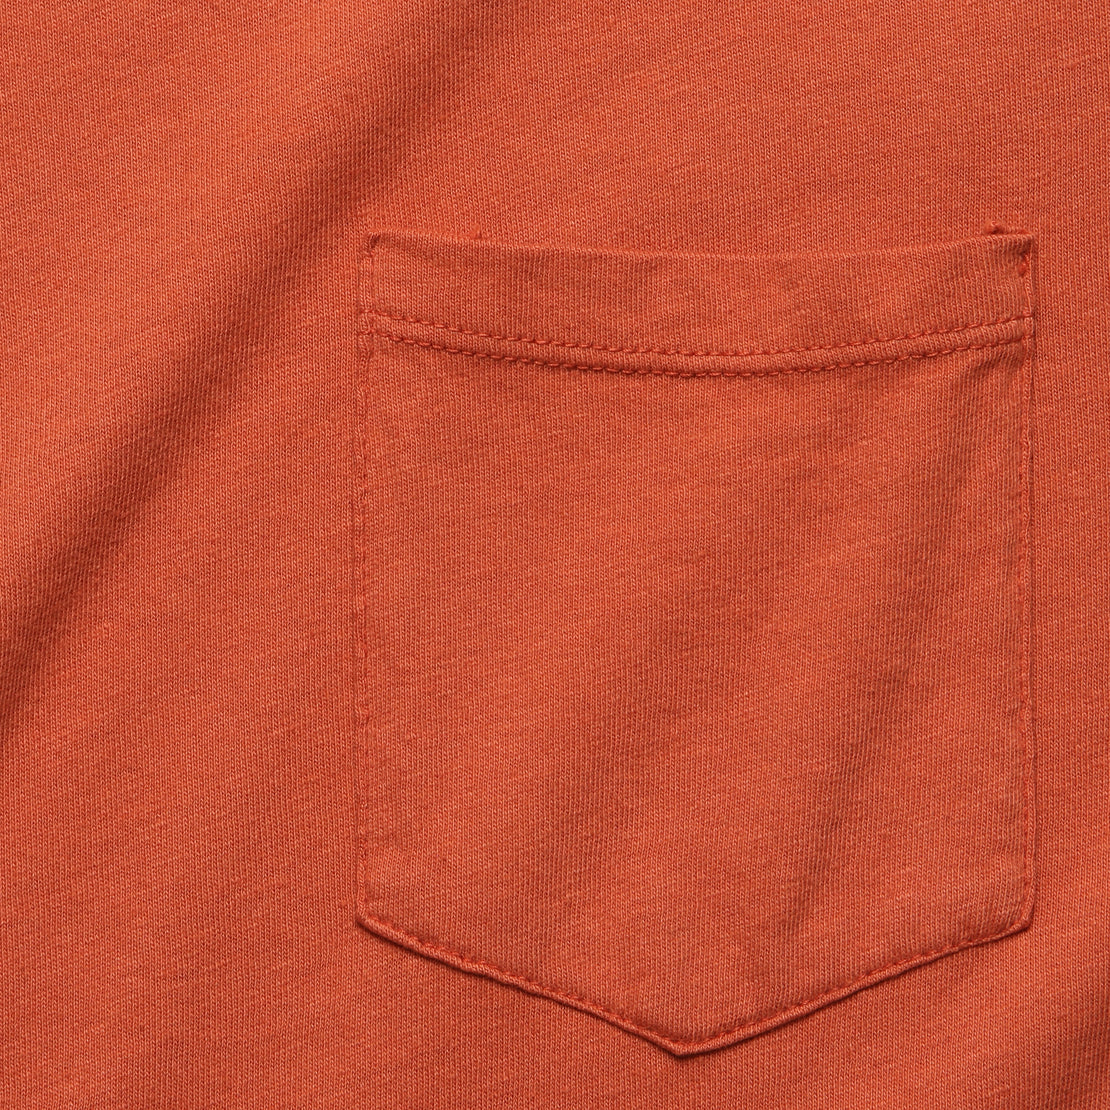 Pocket Tee - Rust - Imogene + Willie - STAG Provisions - Tops - S/S Tee